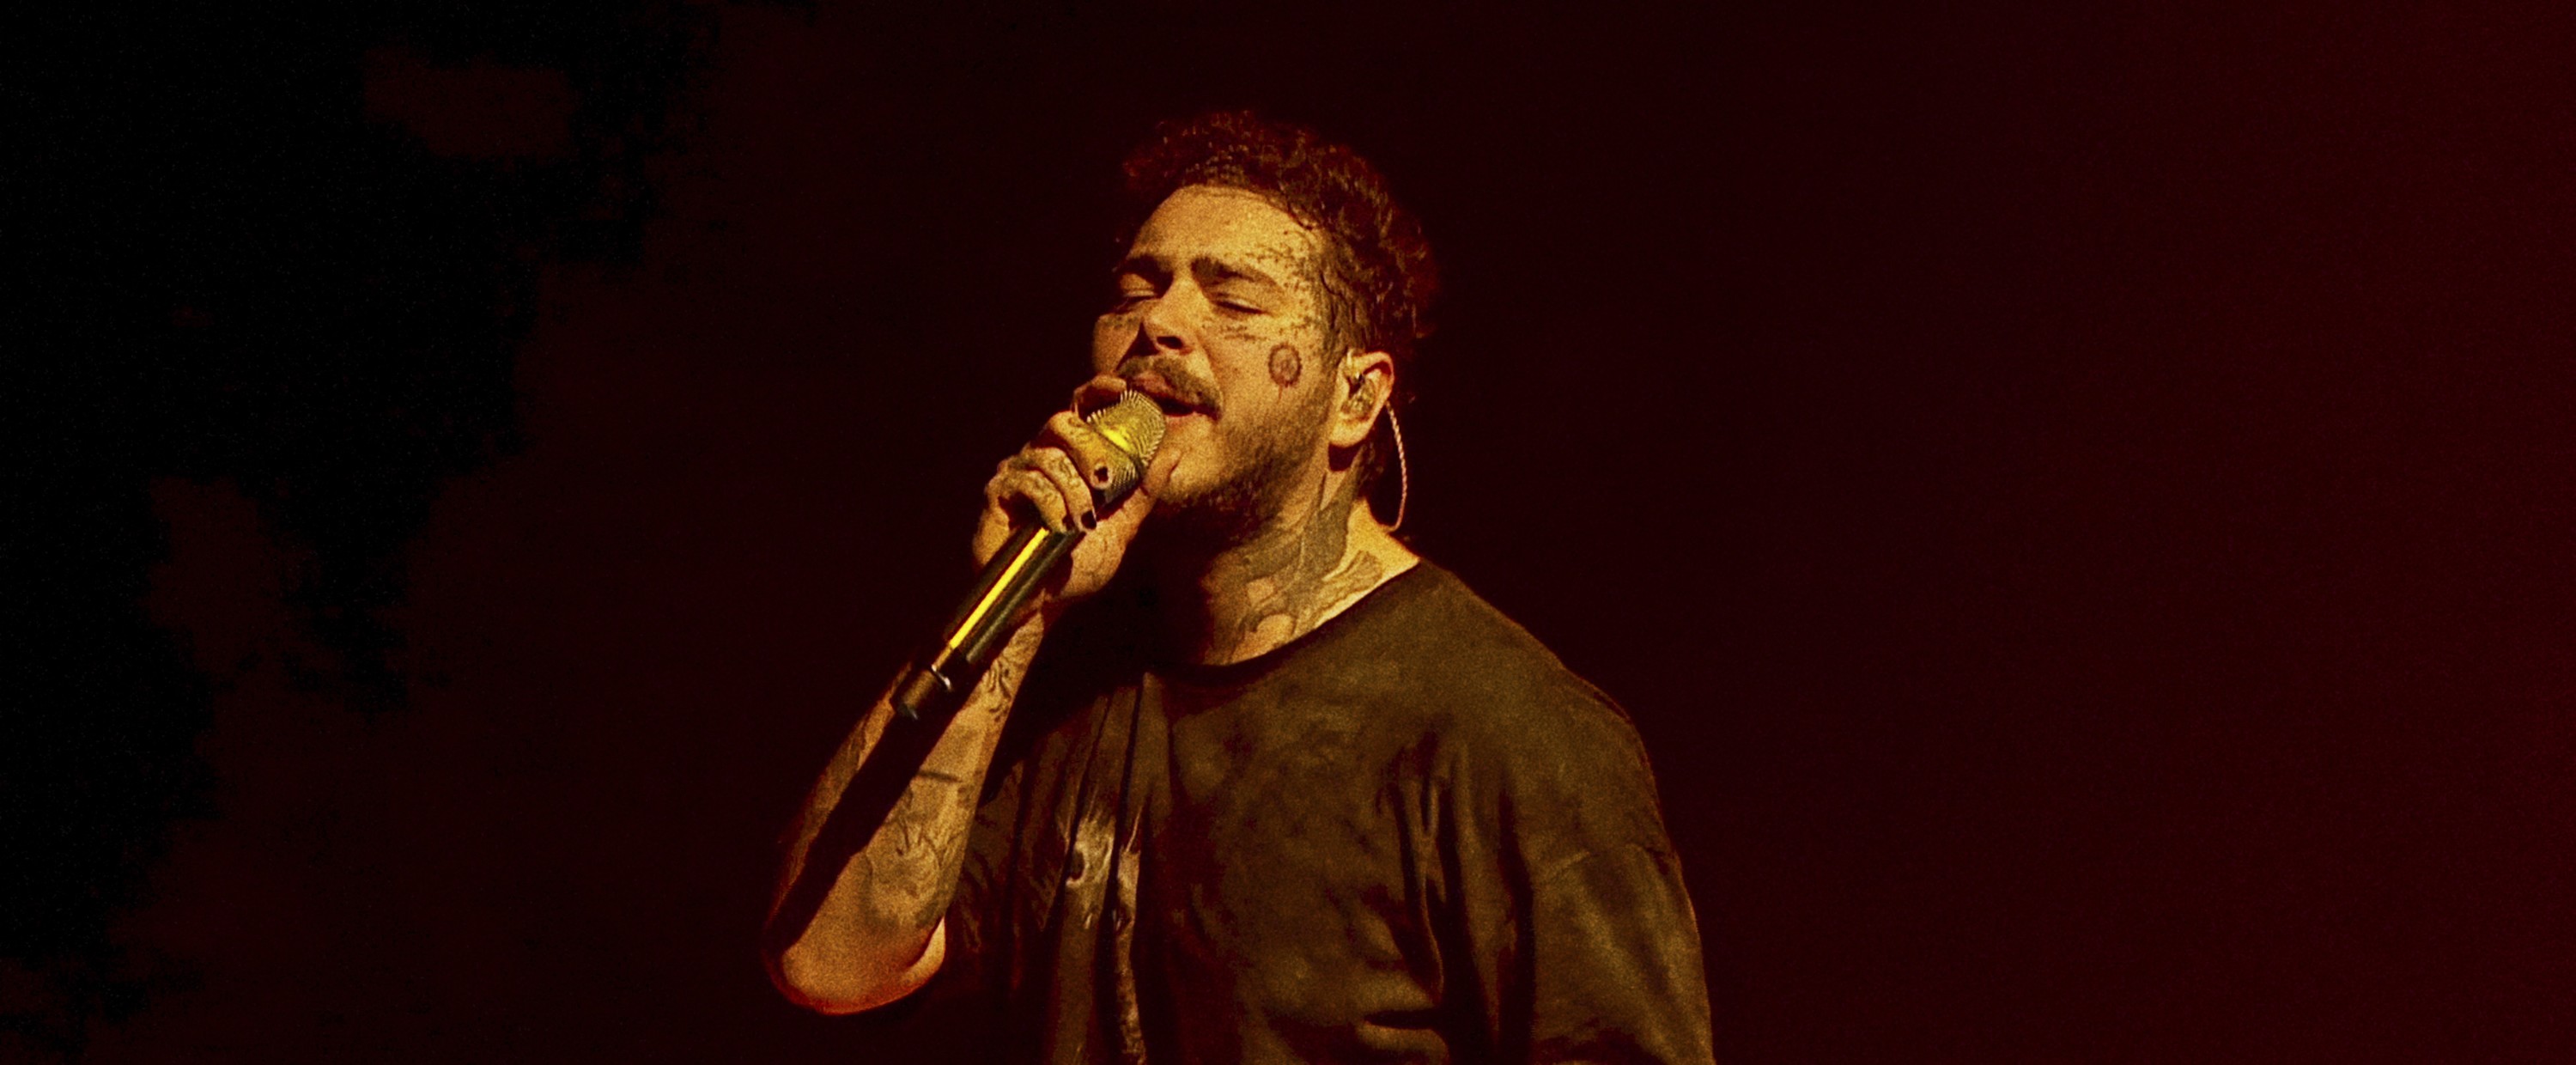 Post Malone with a mic in his hand.